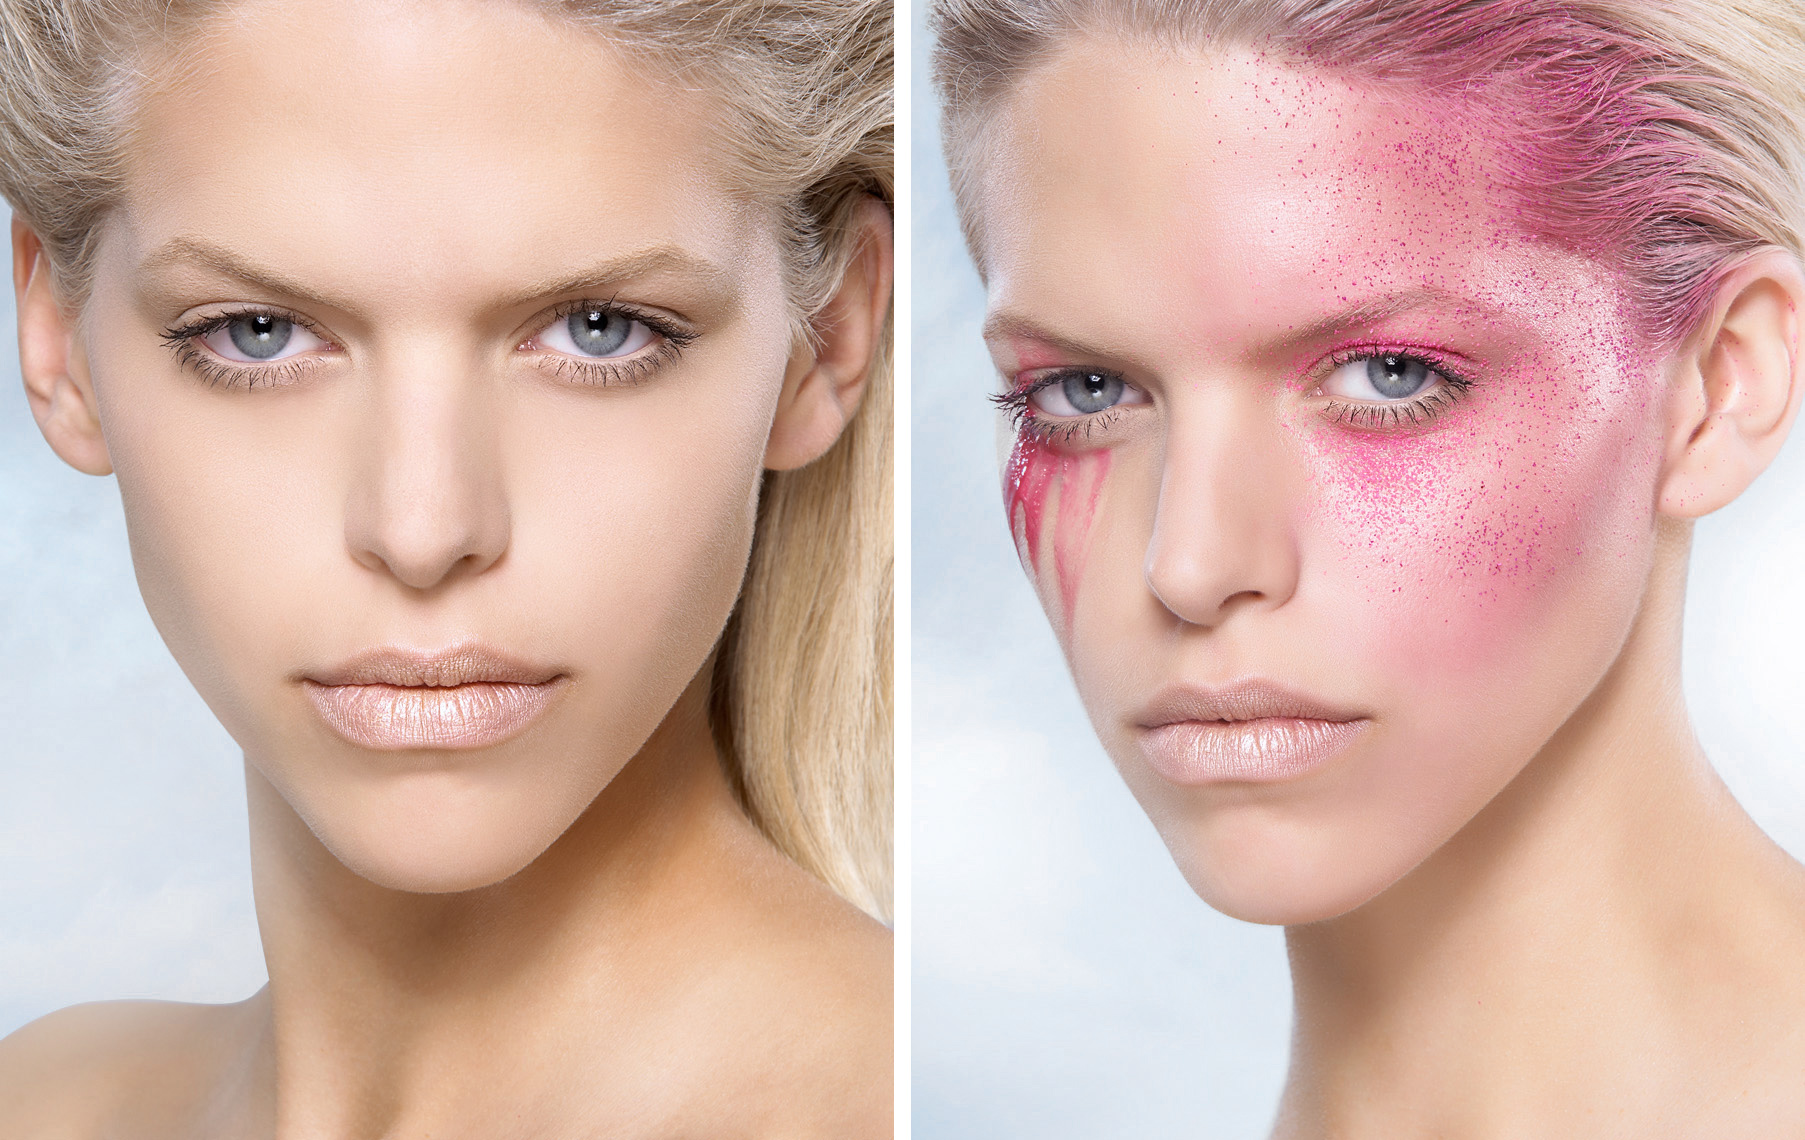 beauty makeup cosmetics photography by Vancouver beauty photographer Waldy Martens